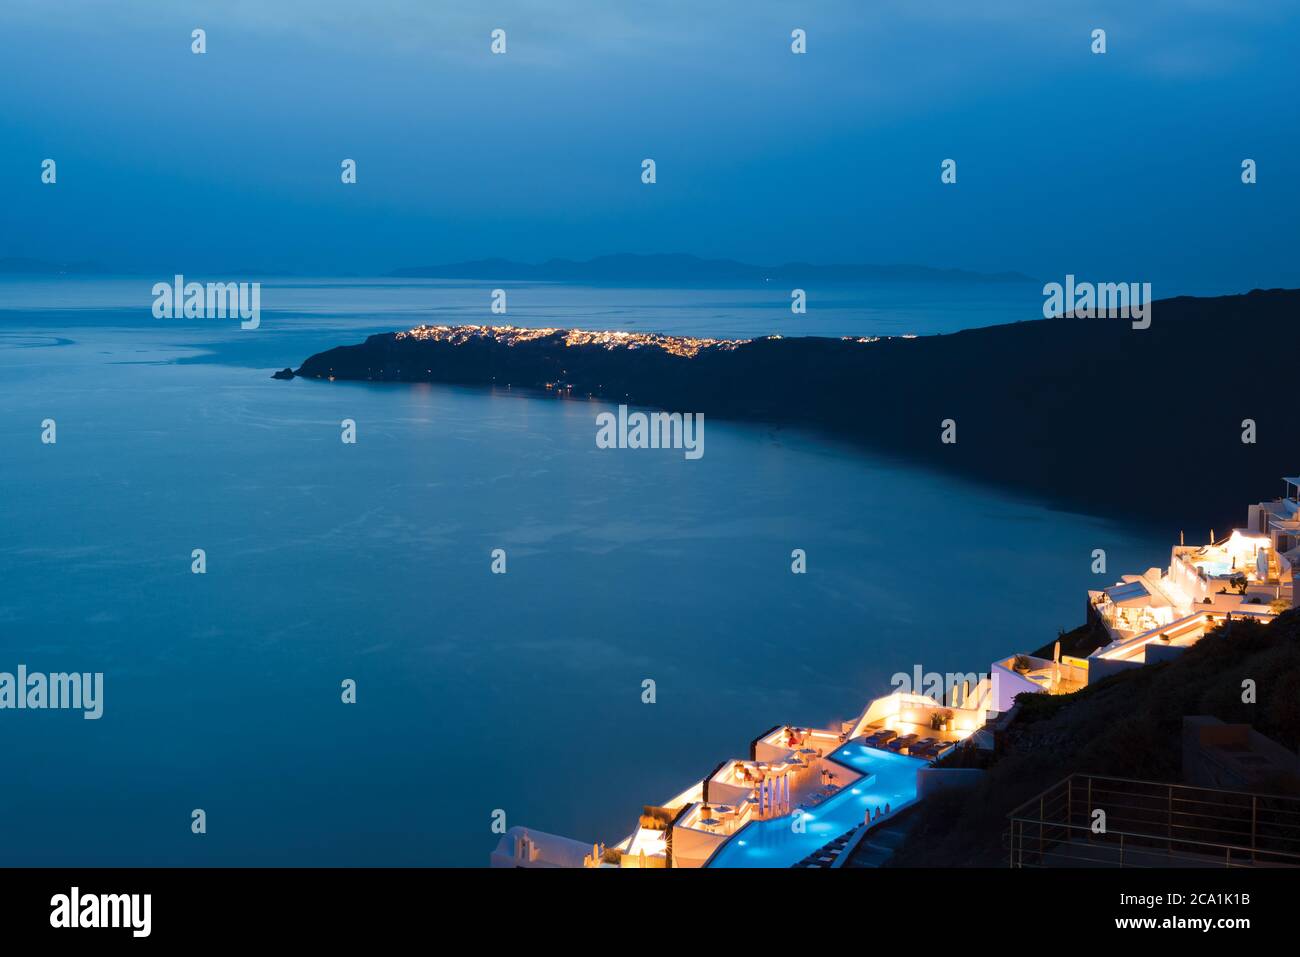 Night view of village on cape in the sea. Oya, Greece Stock Photo